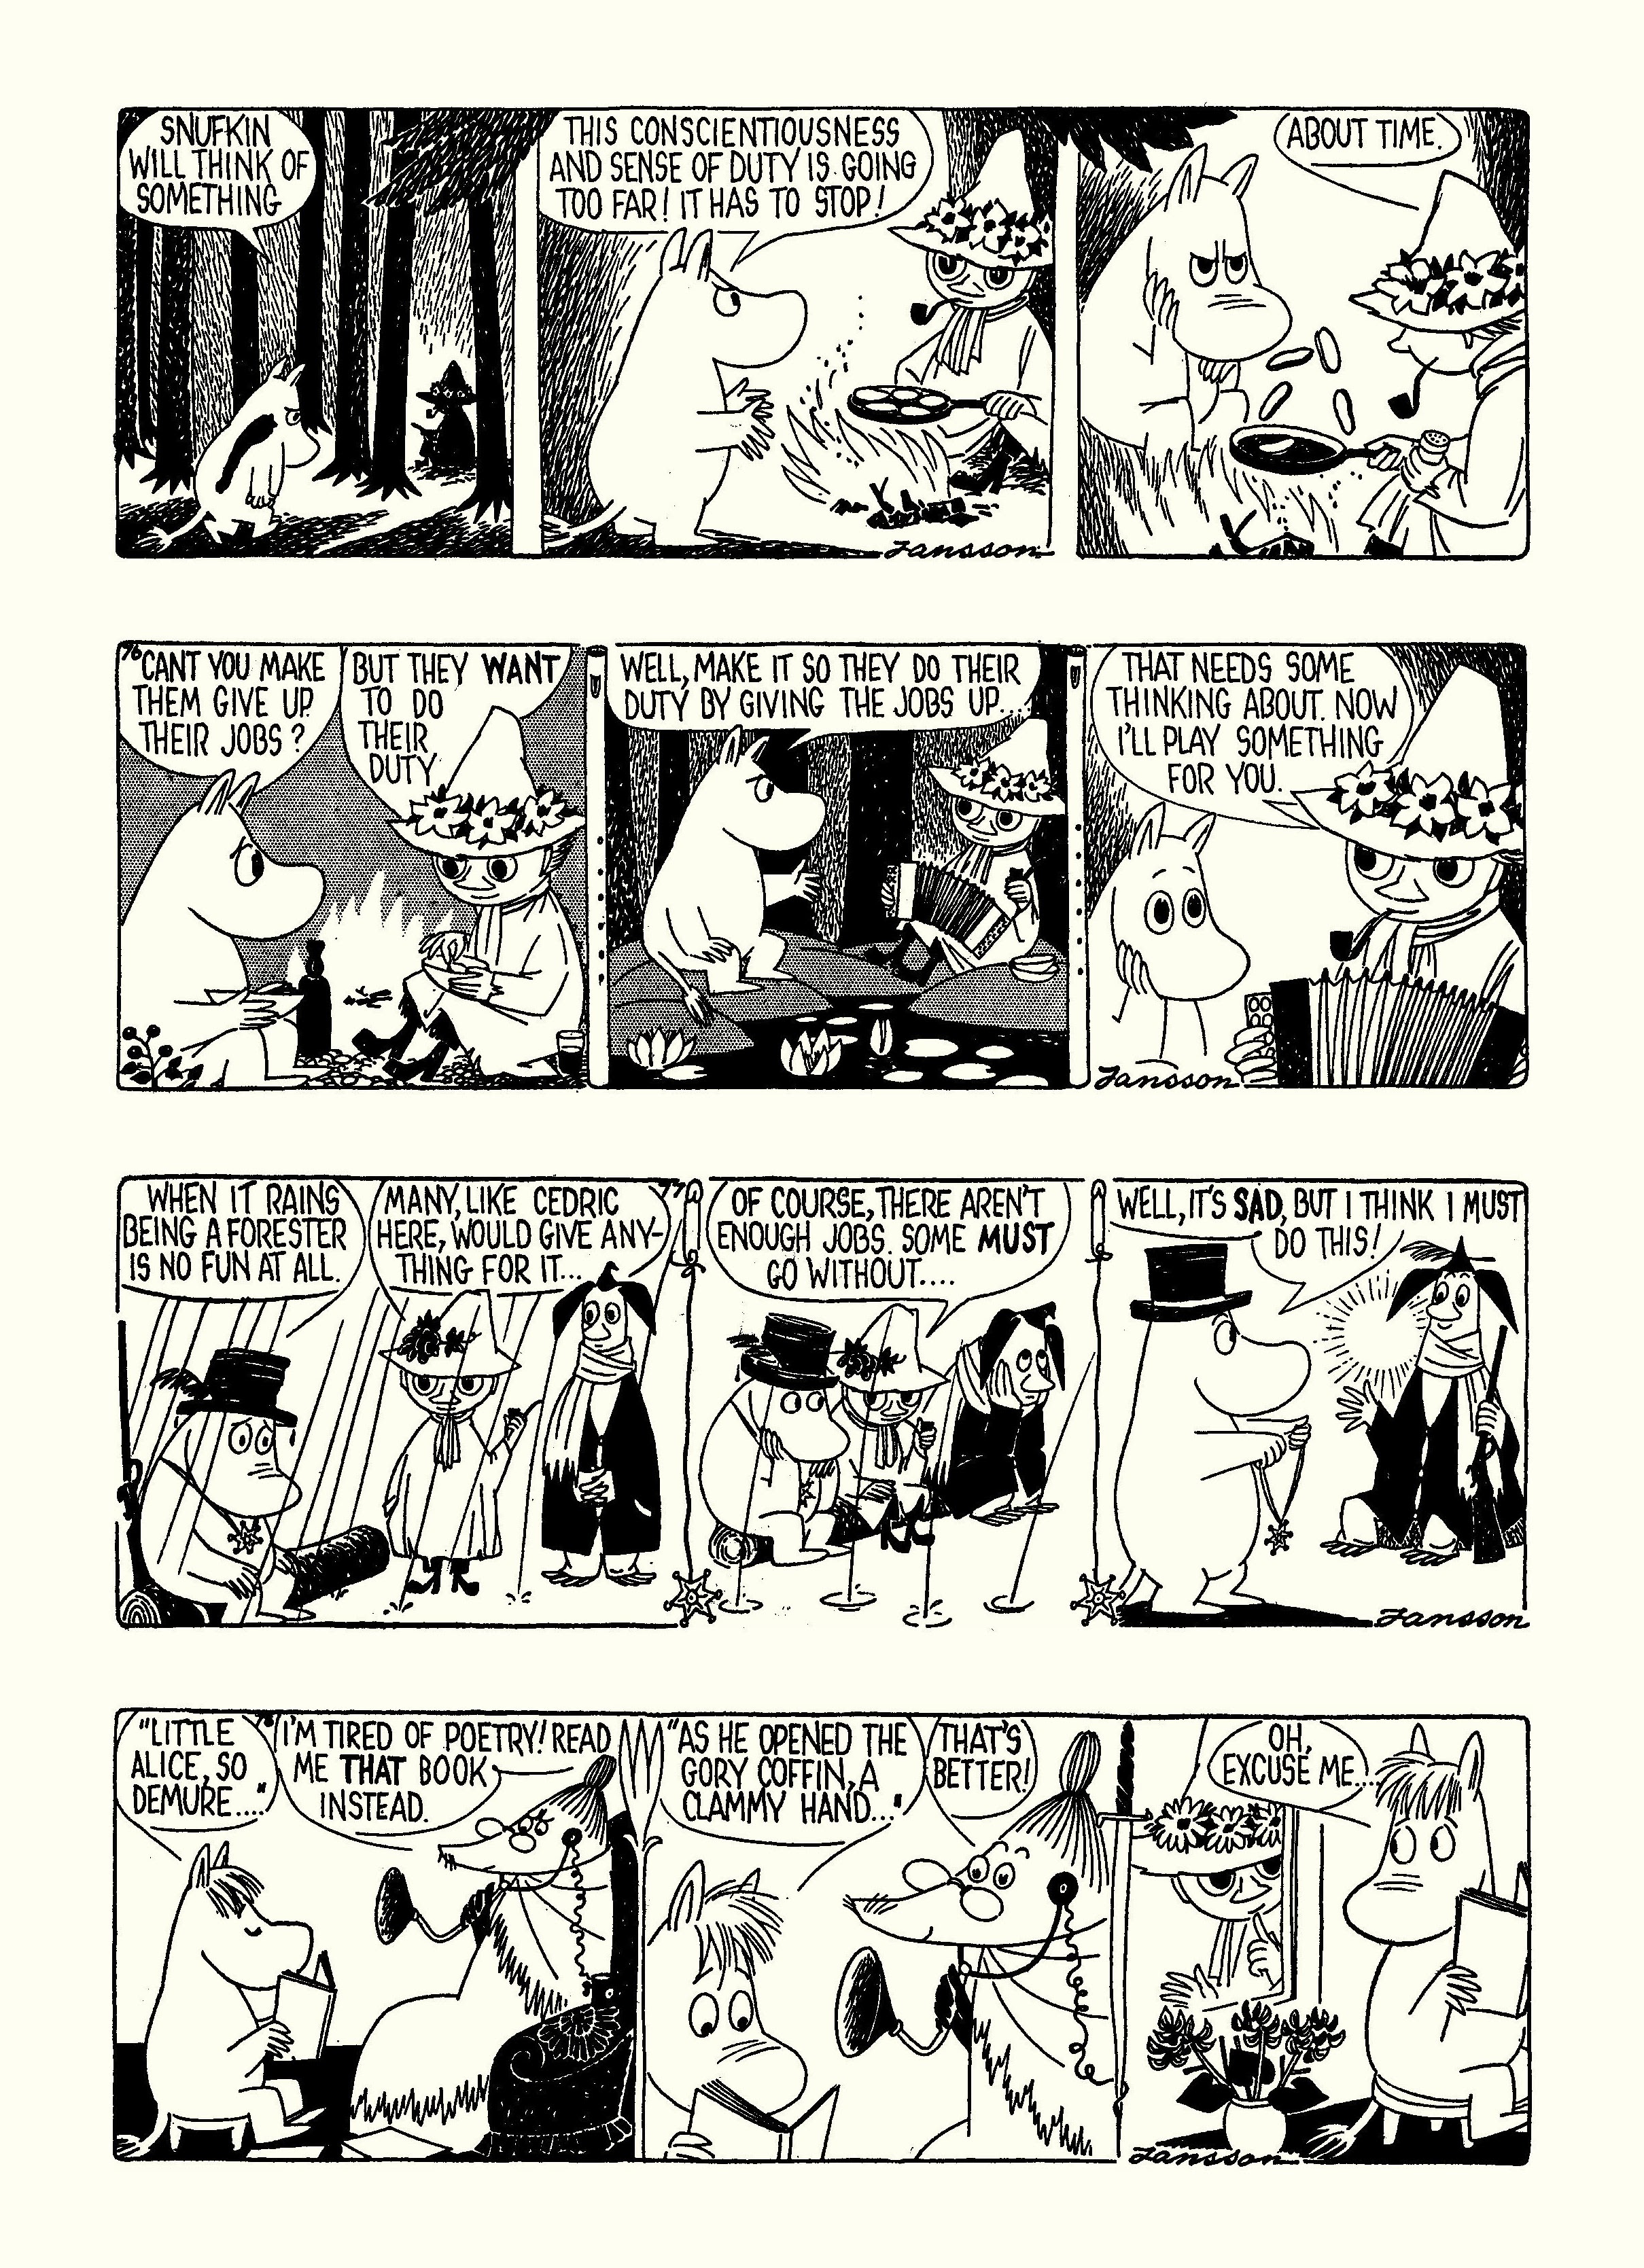 Read online Moomin: The Complete Tove Jansson Comic Strip comic -  Issue # TPB 4 - 56